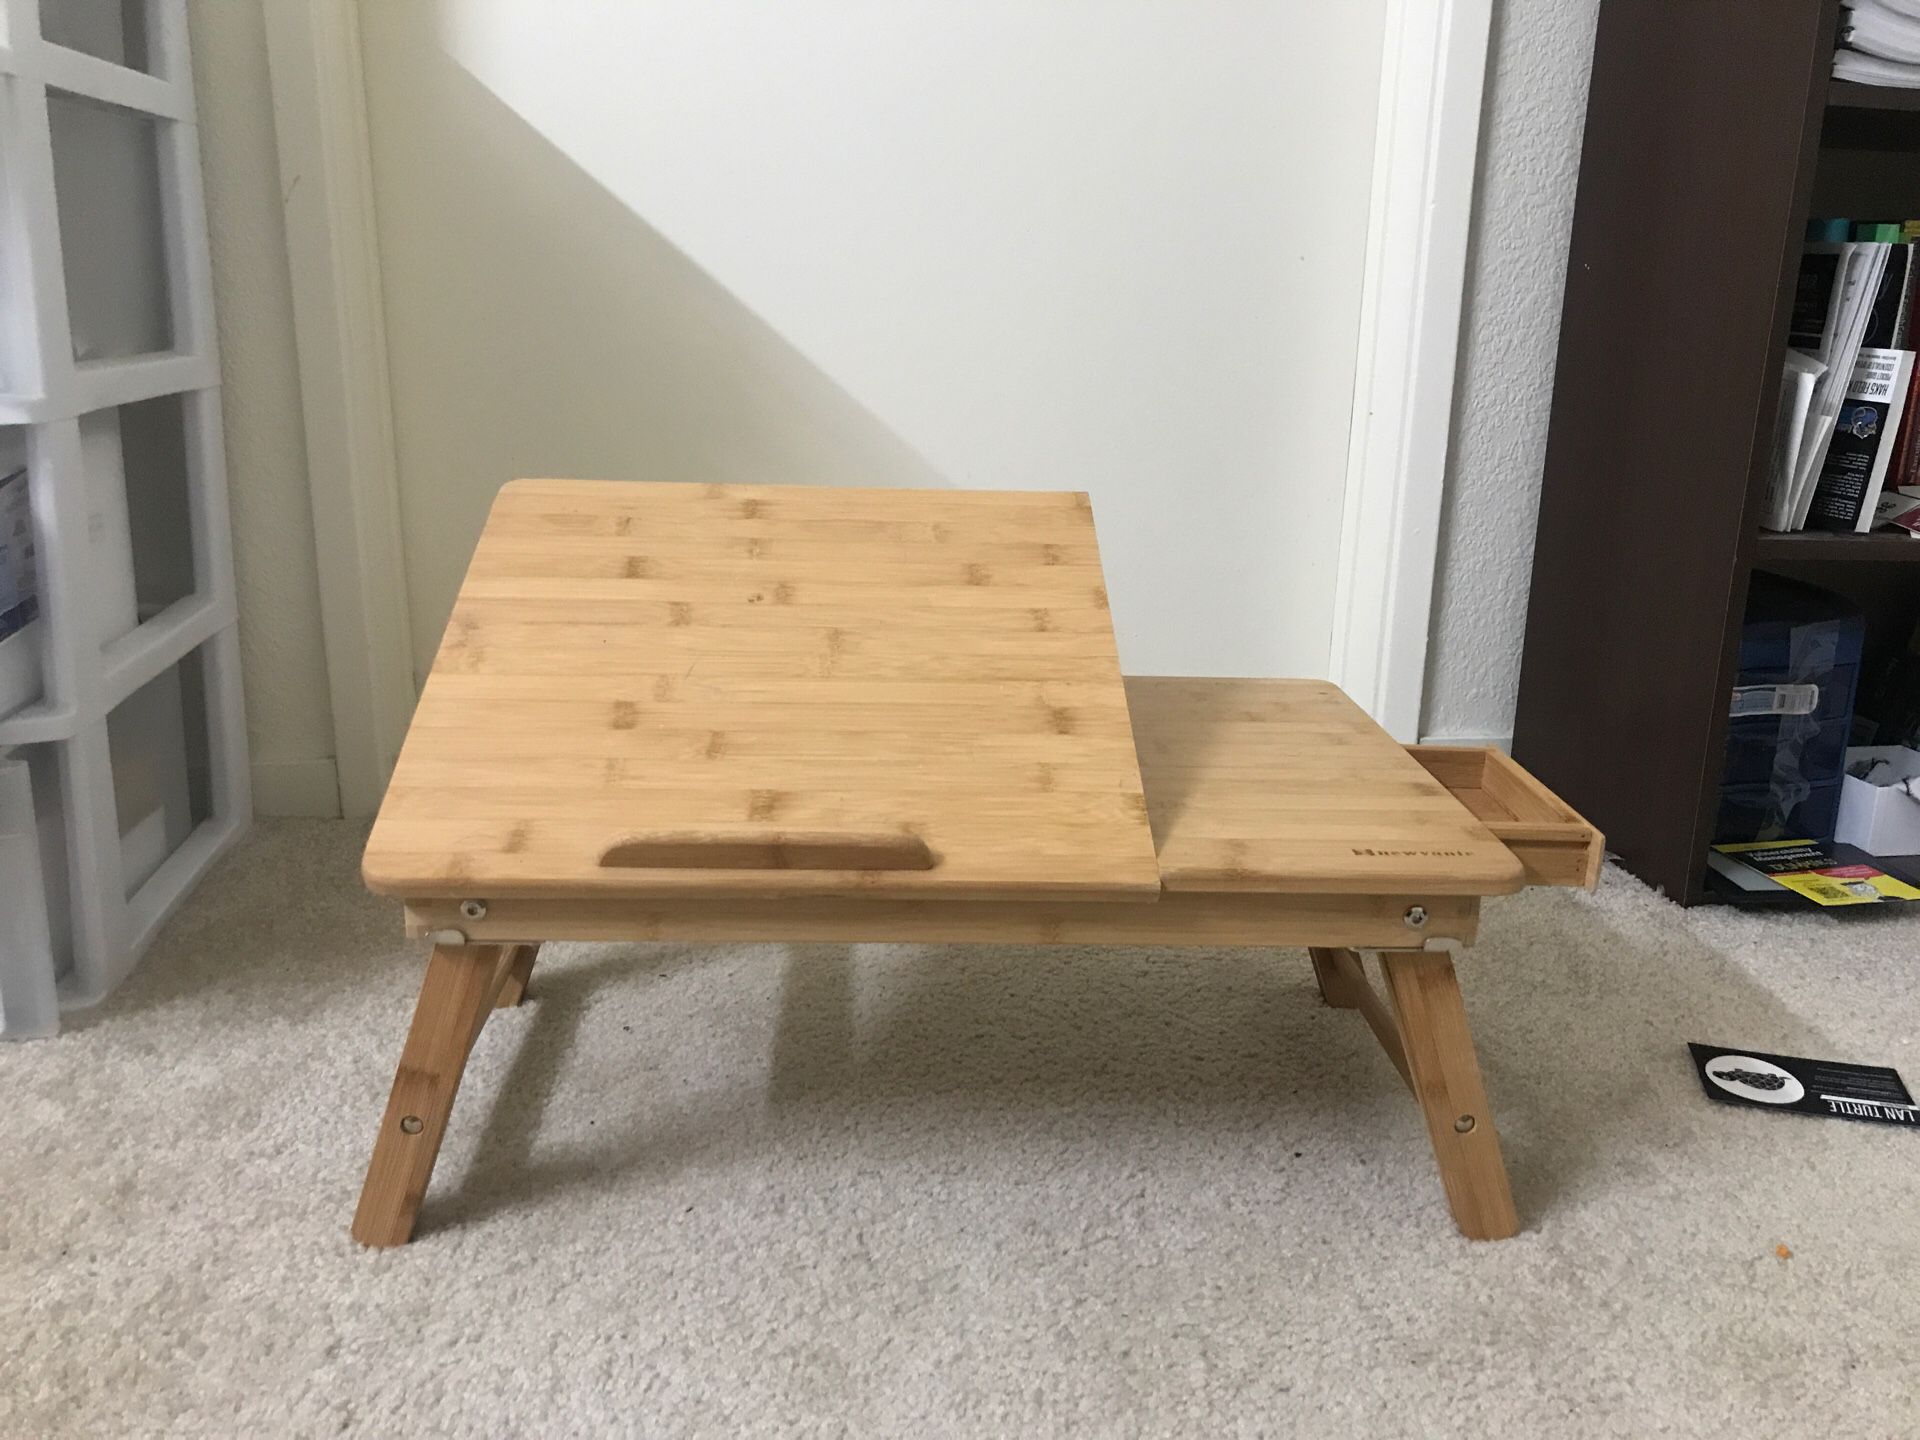 Laptop Stand/table bed